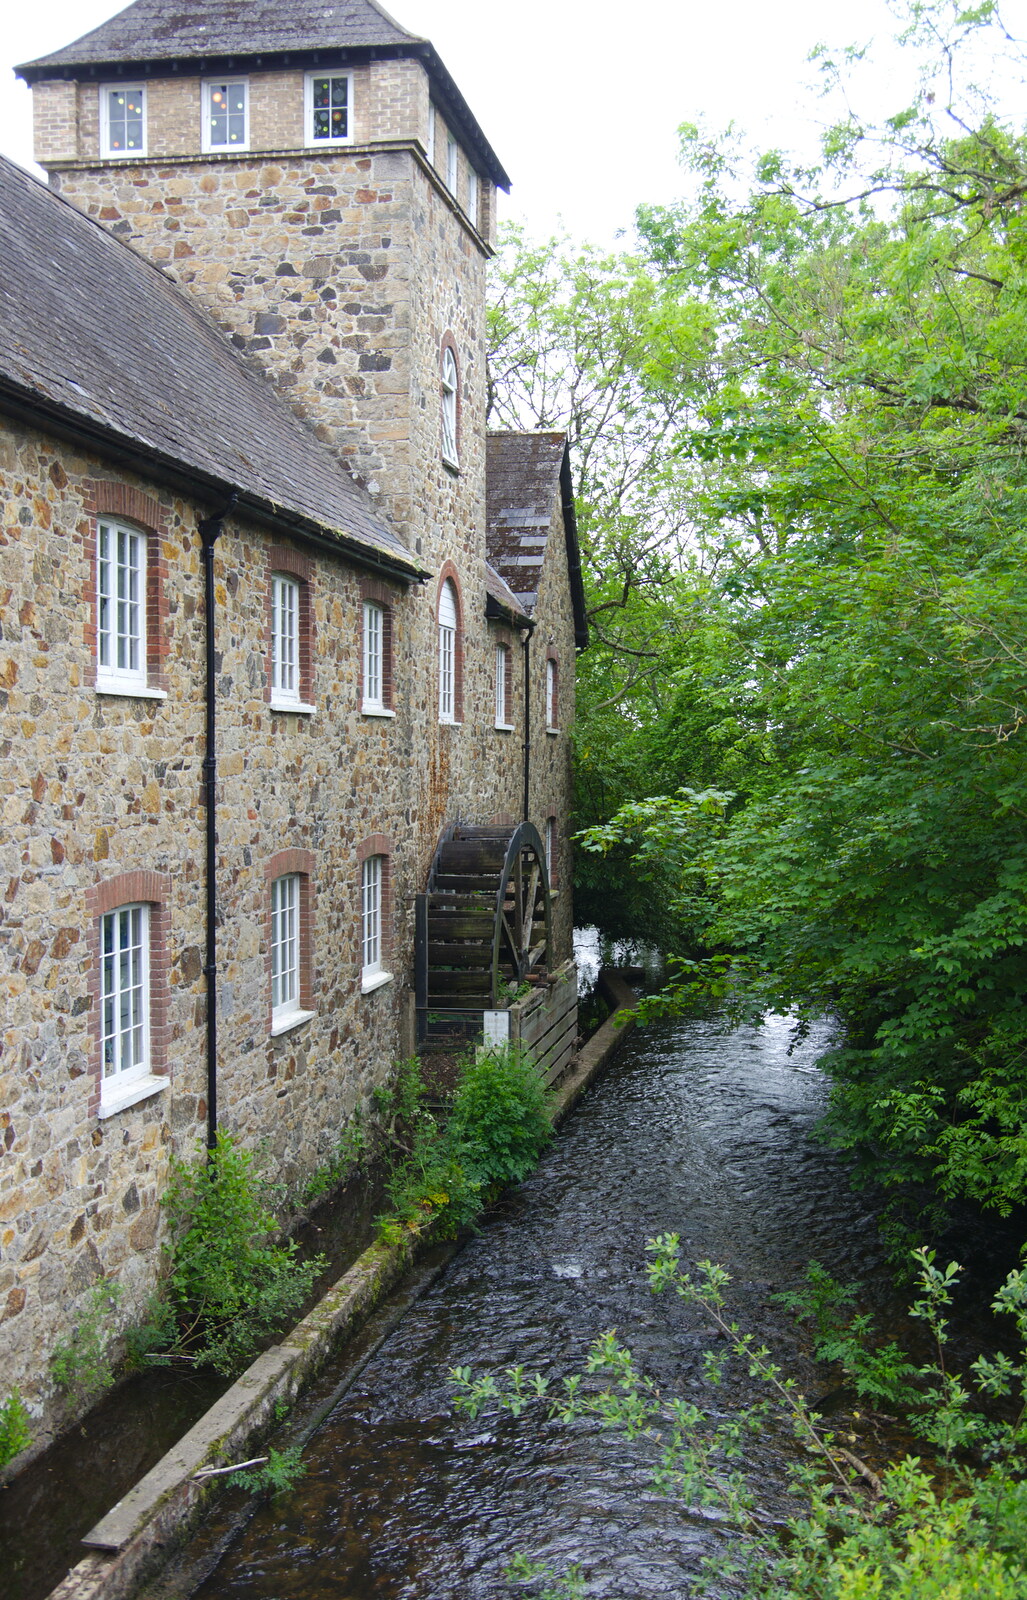 The old mill in Bovey Tracey from The Tom Cobley and a Return to Haytor, Bovey Tracey, Devon - 27th May 2019